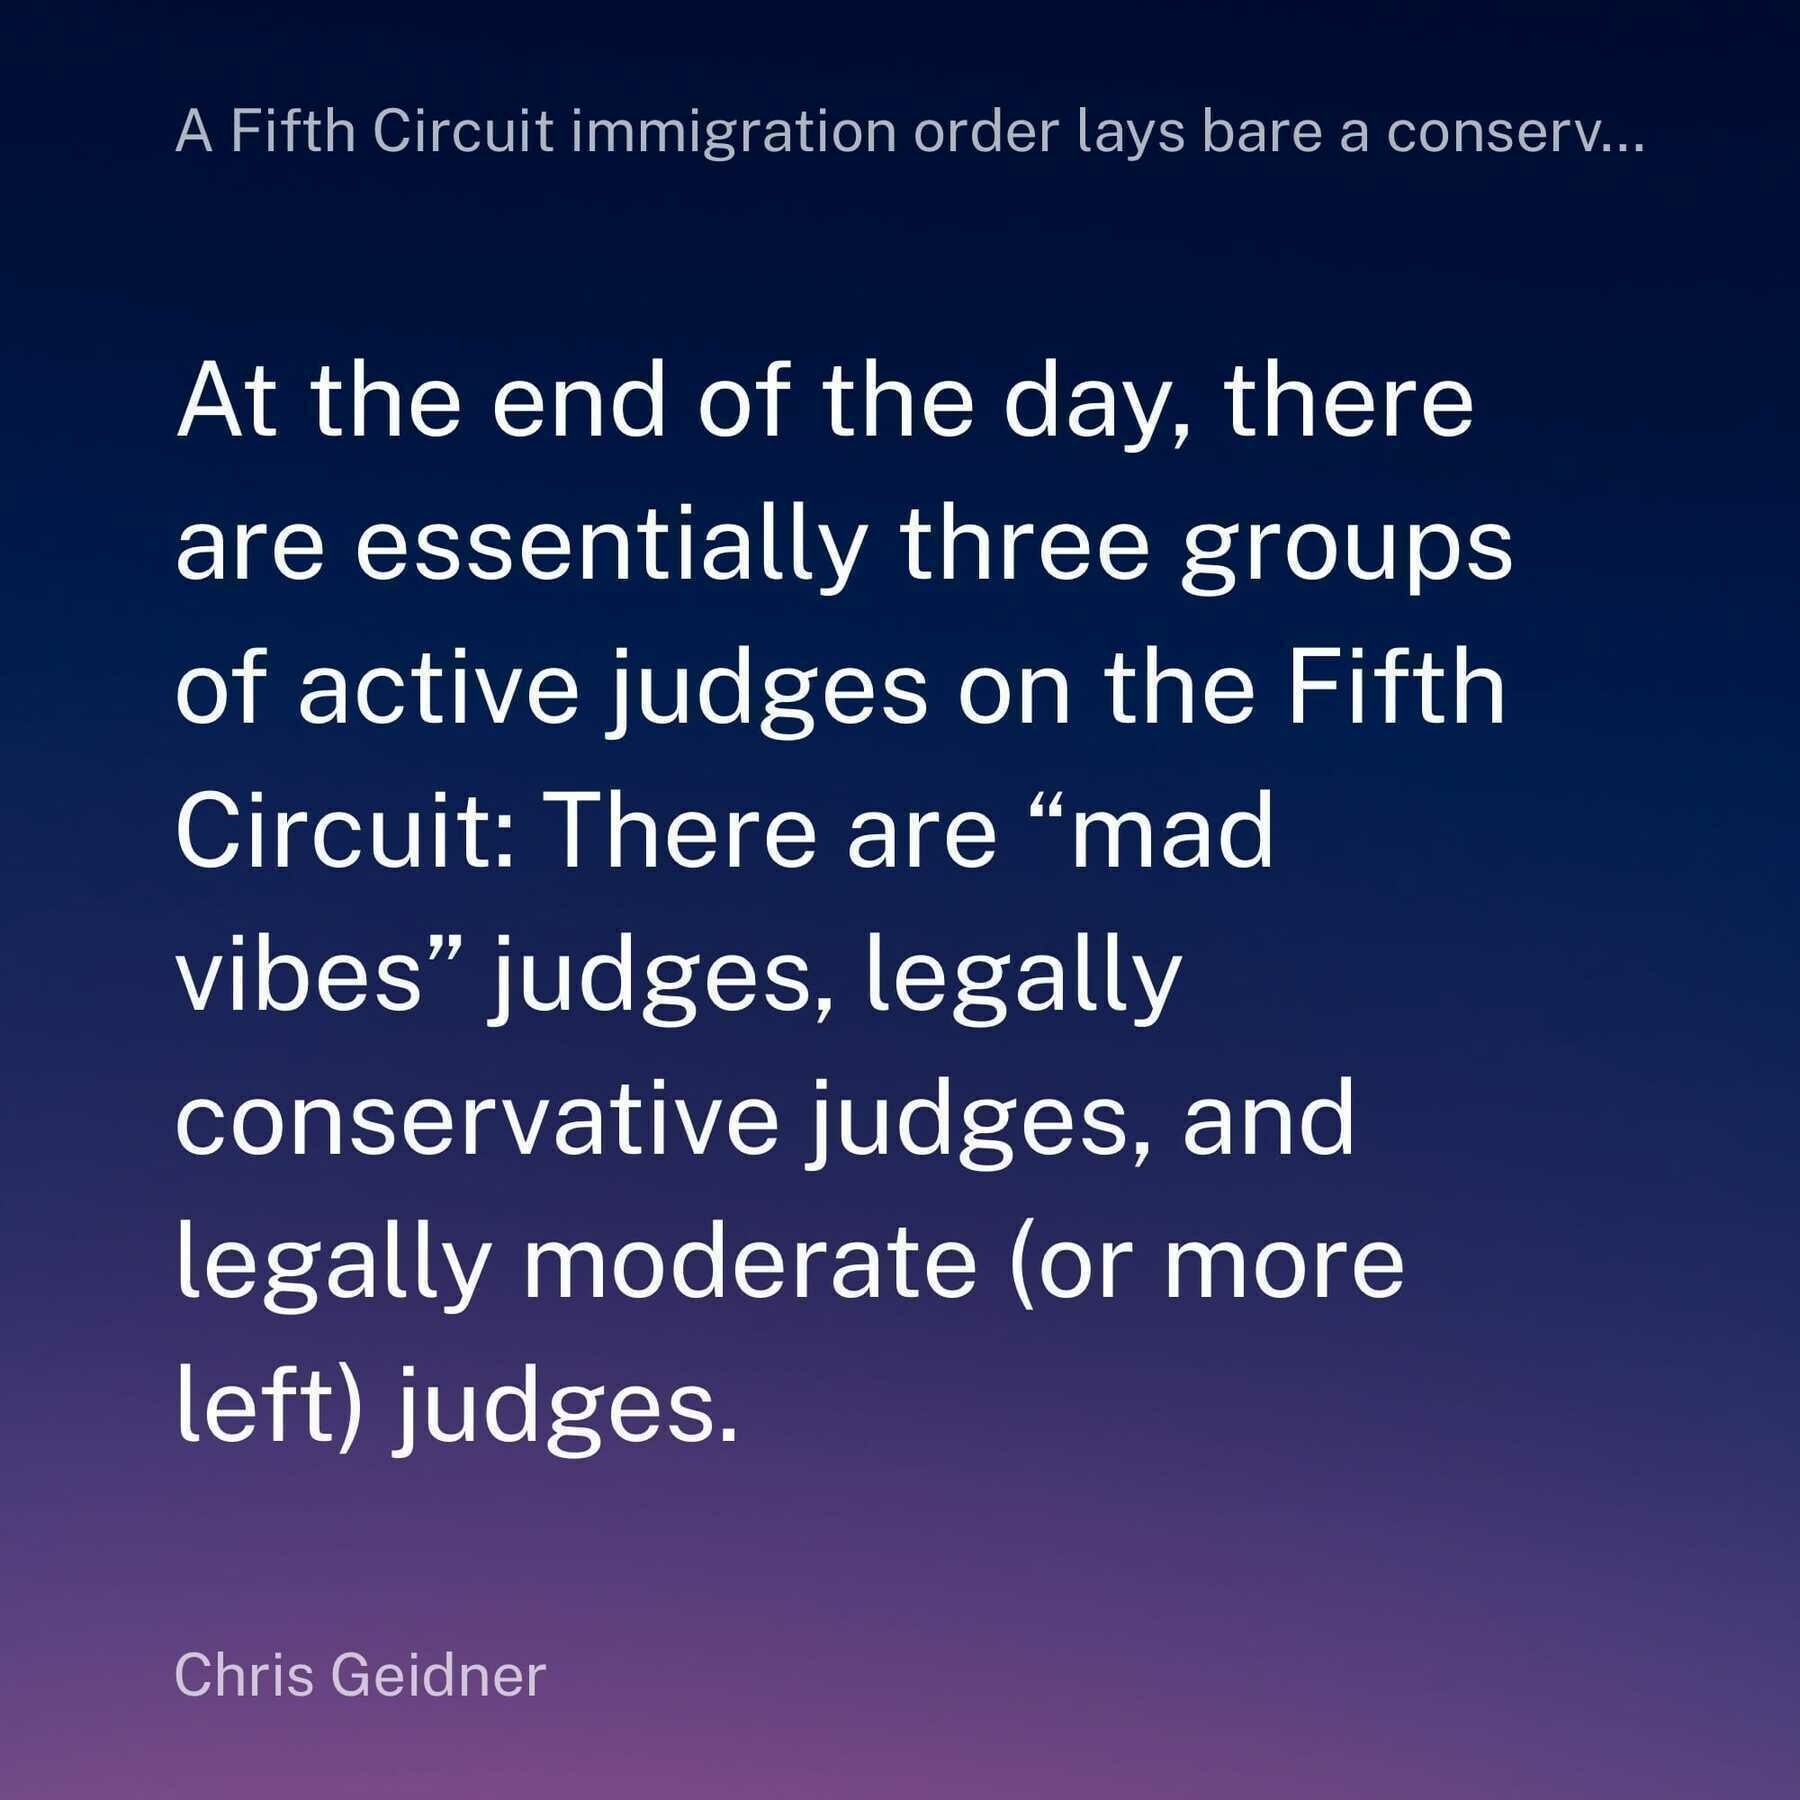 A quote screenshot from an article by Chris Geidner in his Law Dork newsletter, which says:&10;&10;At the end of the day, there are essentially three groups of active judges on the Fifth Circuit: There are “mad vibes” judges, legally conservative judges, and legally moderate (or more left) judges.